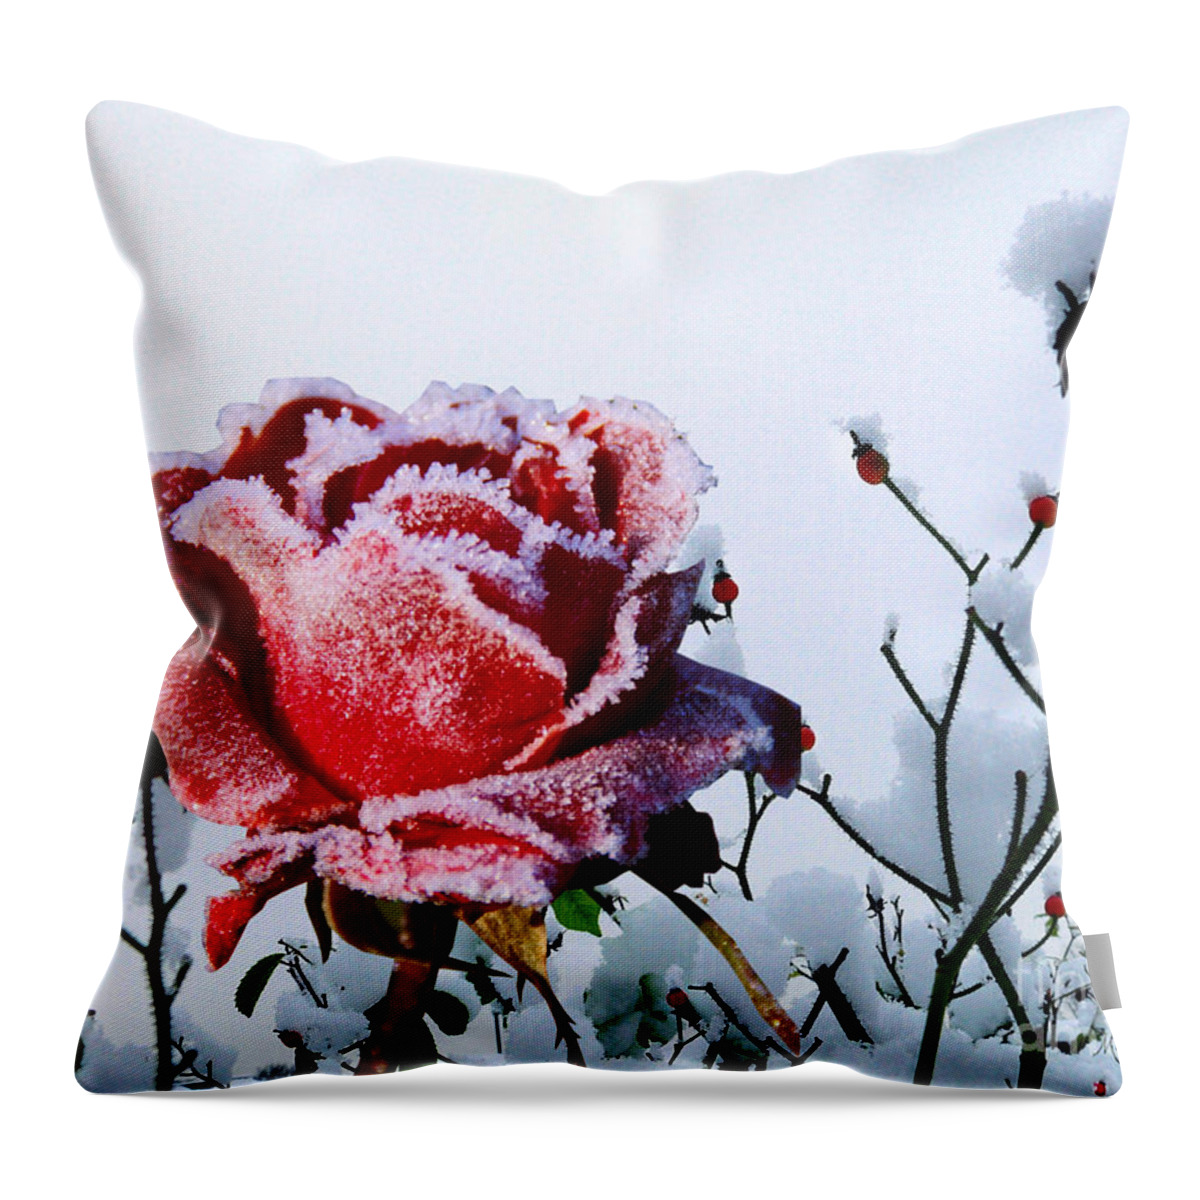 Red Rose Throw Pillow featuring the mixed media Jack Frost by Morag Bates